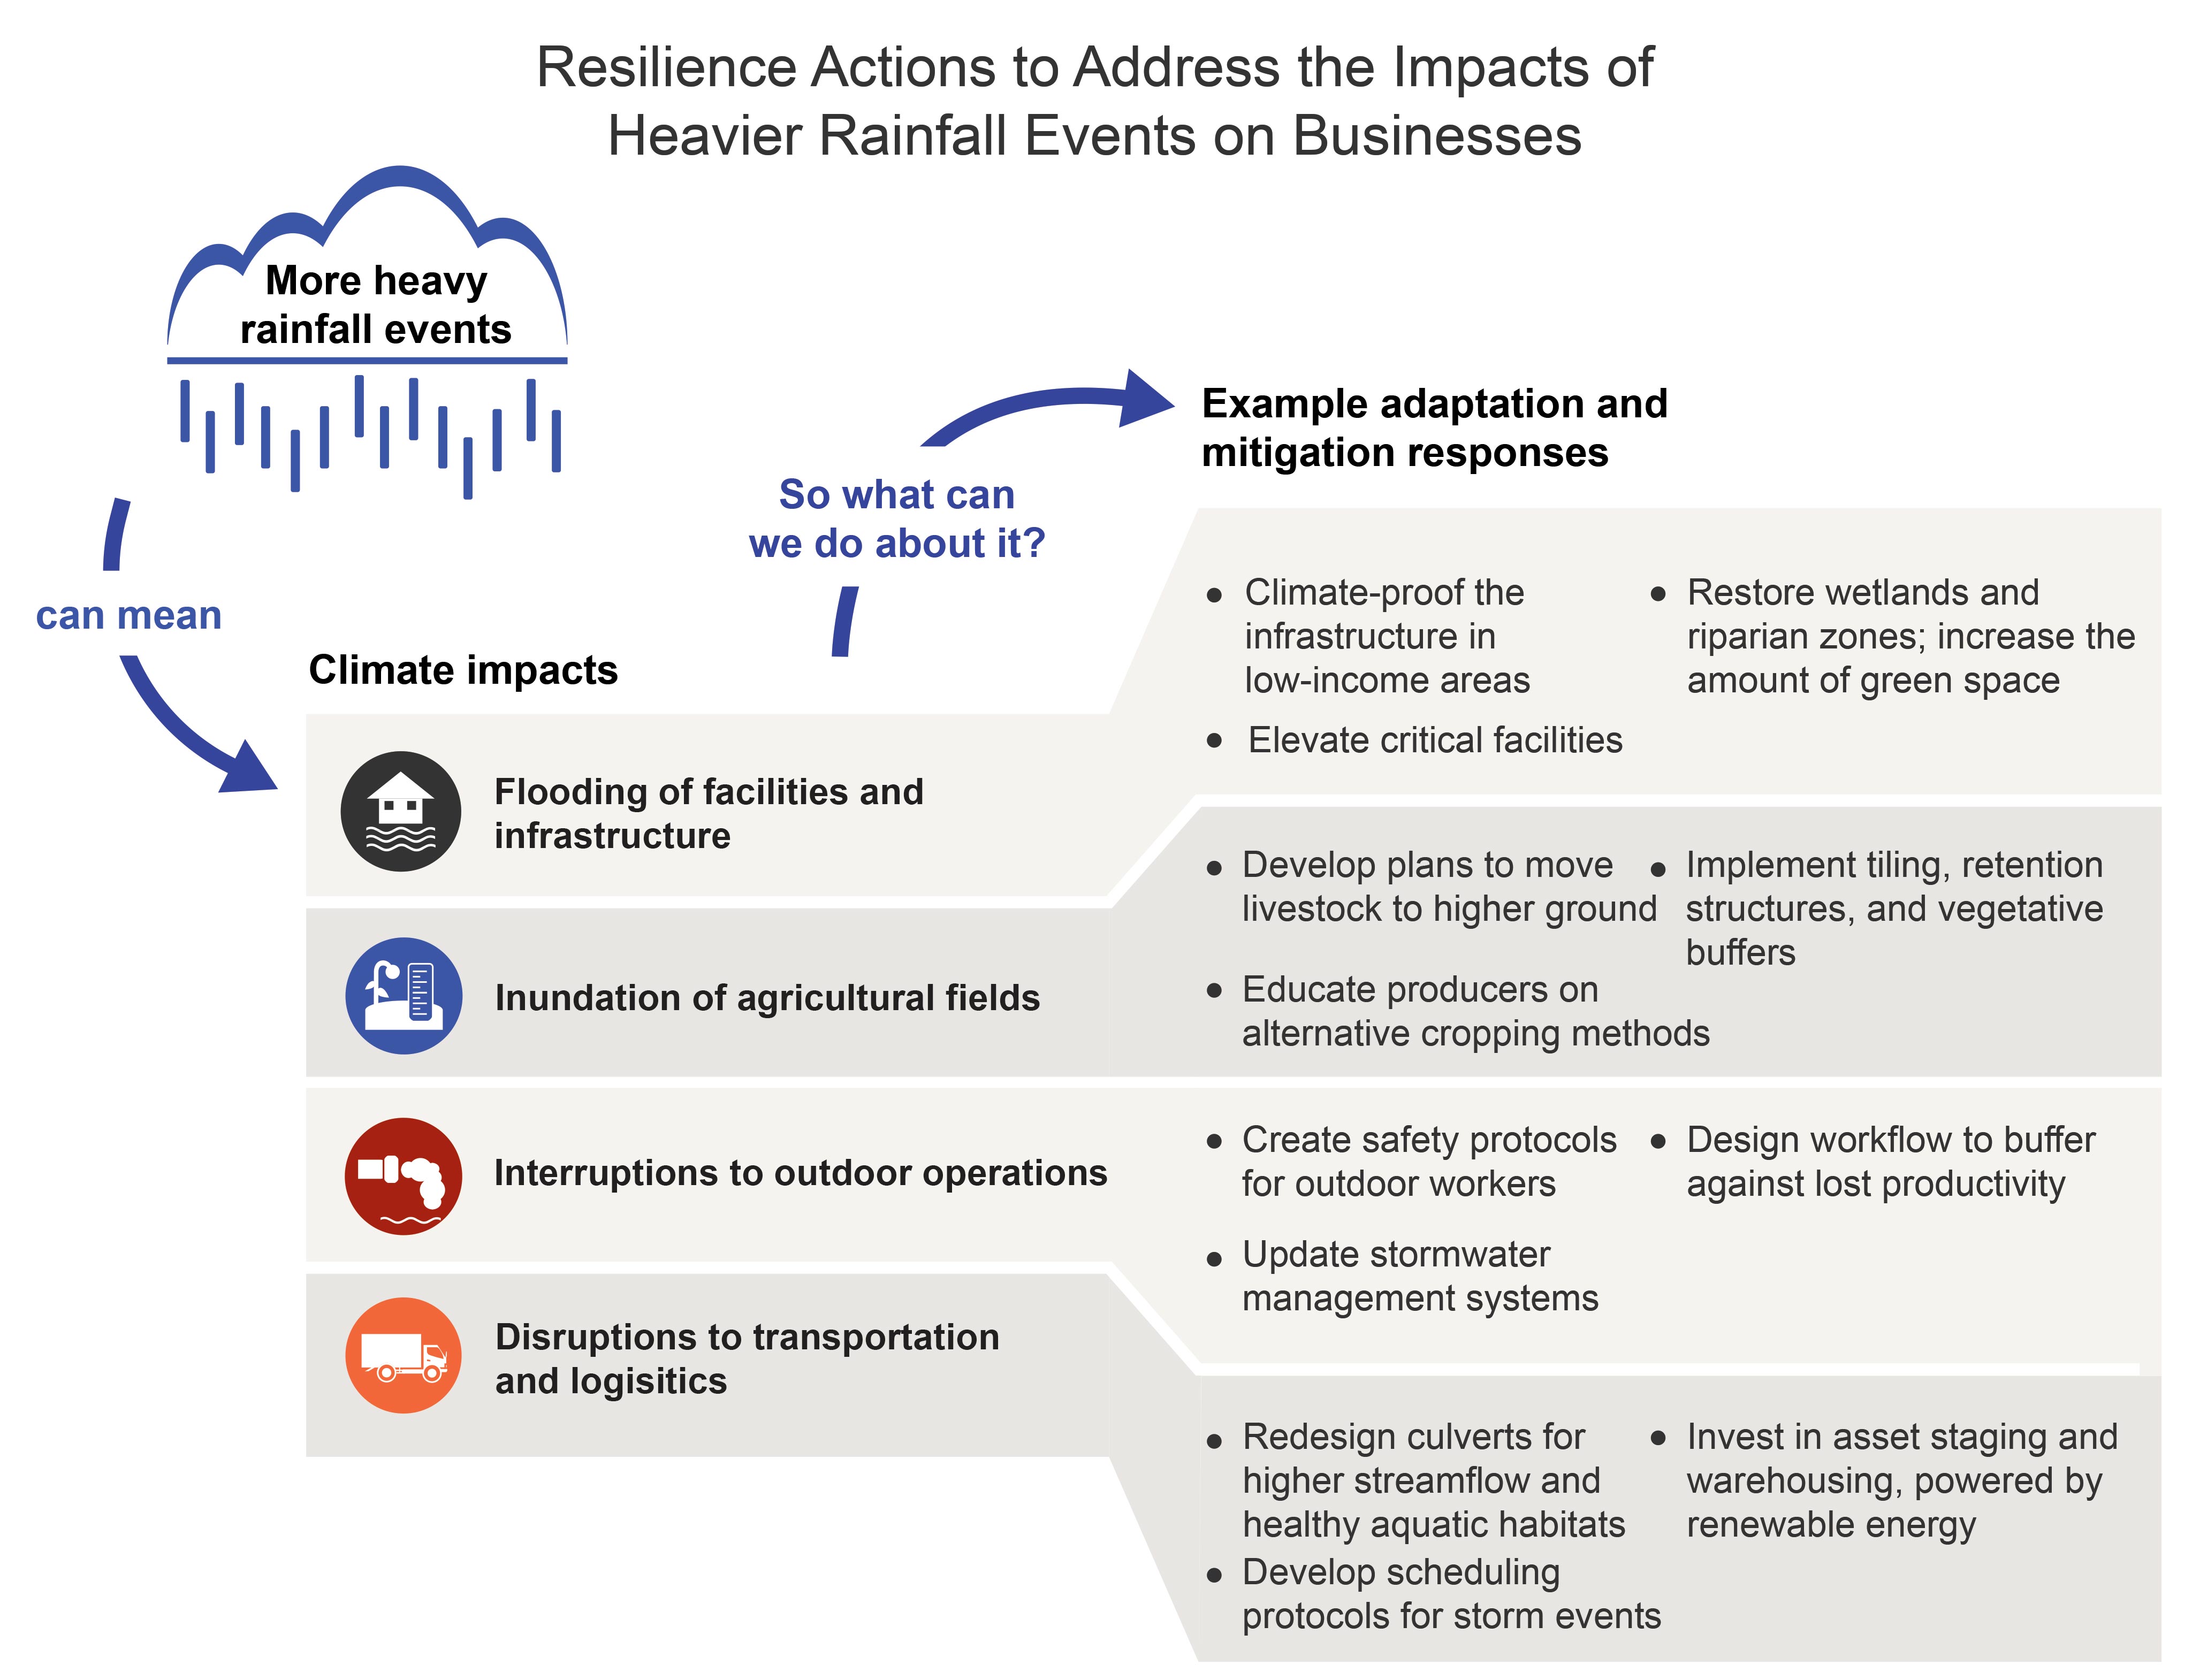 Resilience Actions to Address the Impacts of Heavier Rainfall Events on Businesses